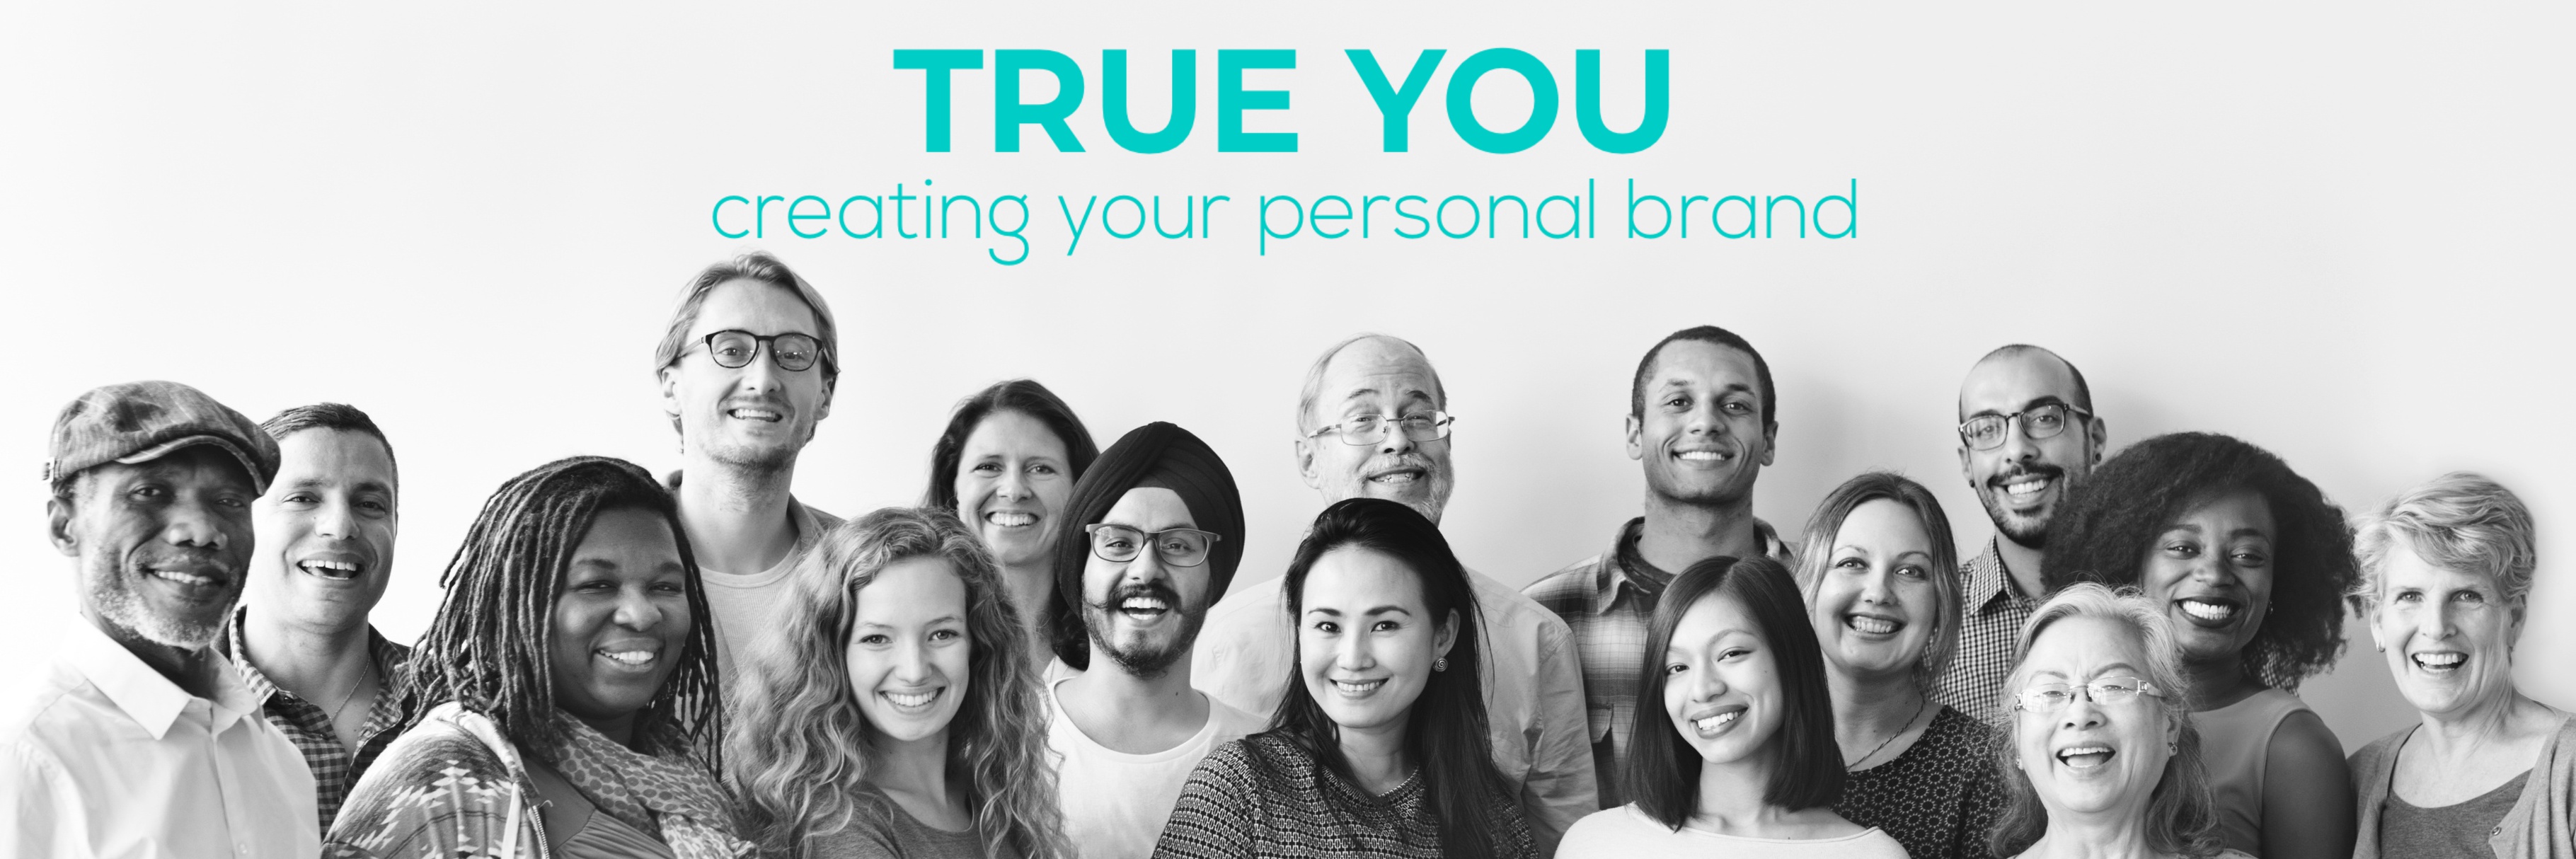 True You: Creating Your Personal Brand